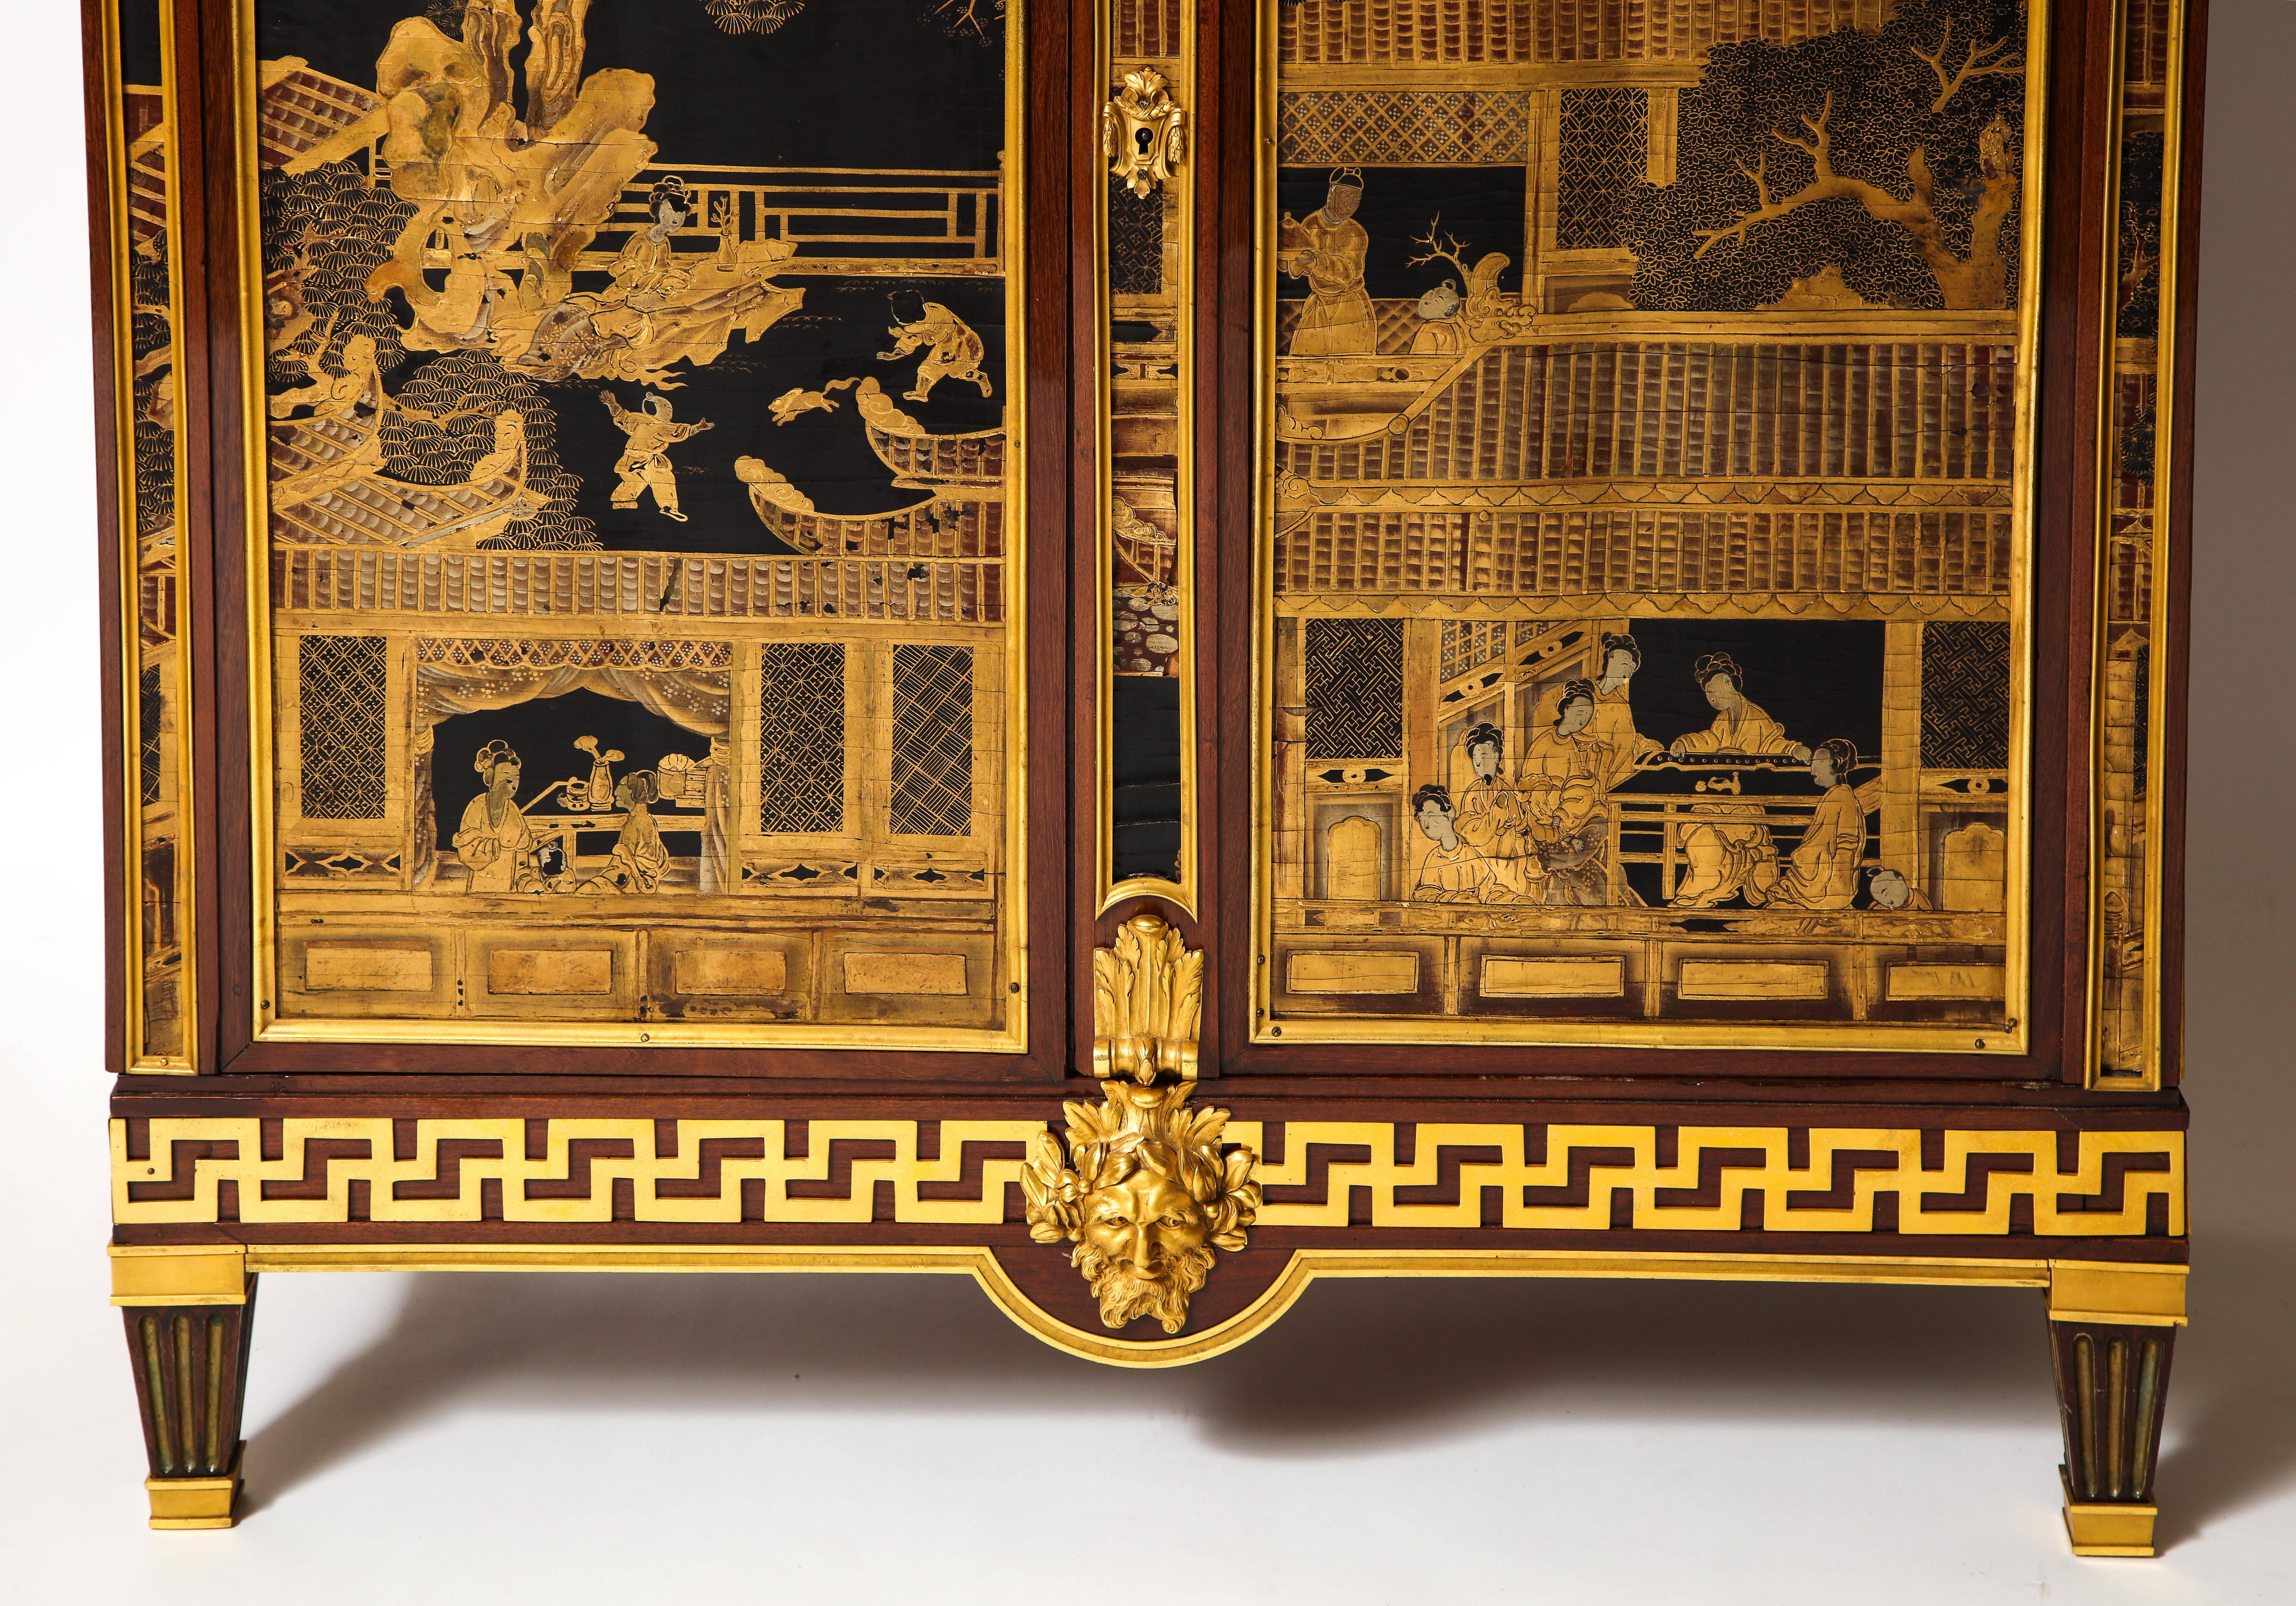 A spectacular antique French Louis XVI style gilt bronze mounted mahogany Chinese lacquered double door cabinet embellished with Chinese gilt decorated lacquered panels depicting chinoiserie scenes and further mounted with fine gilt bronze detail,